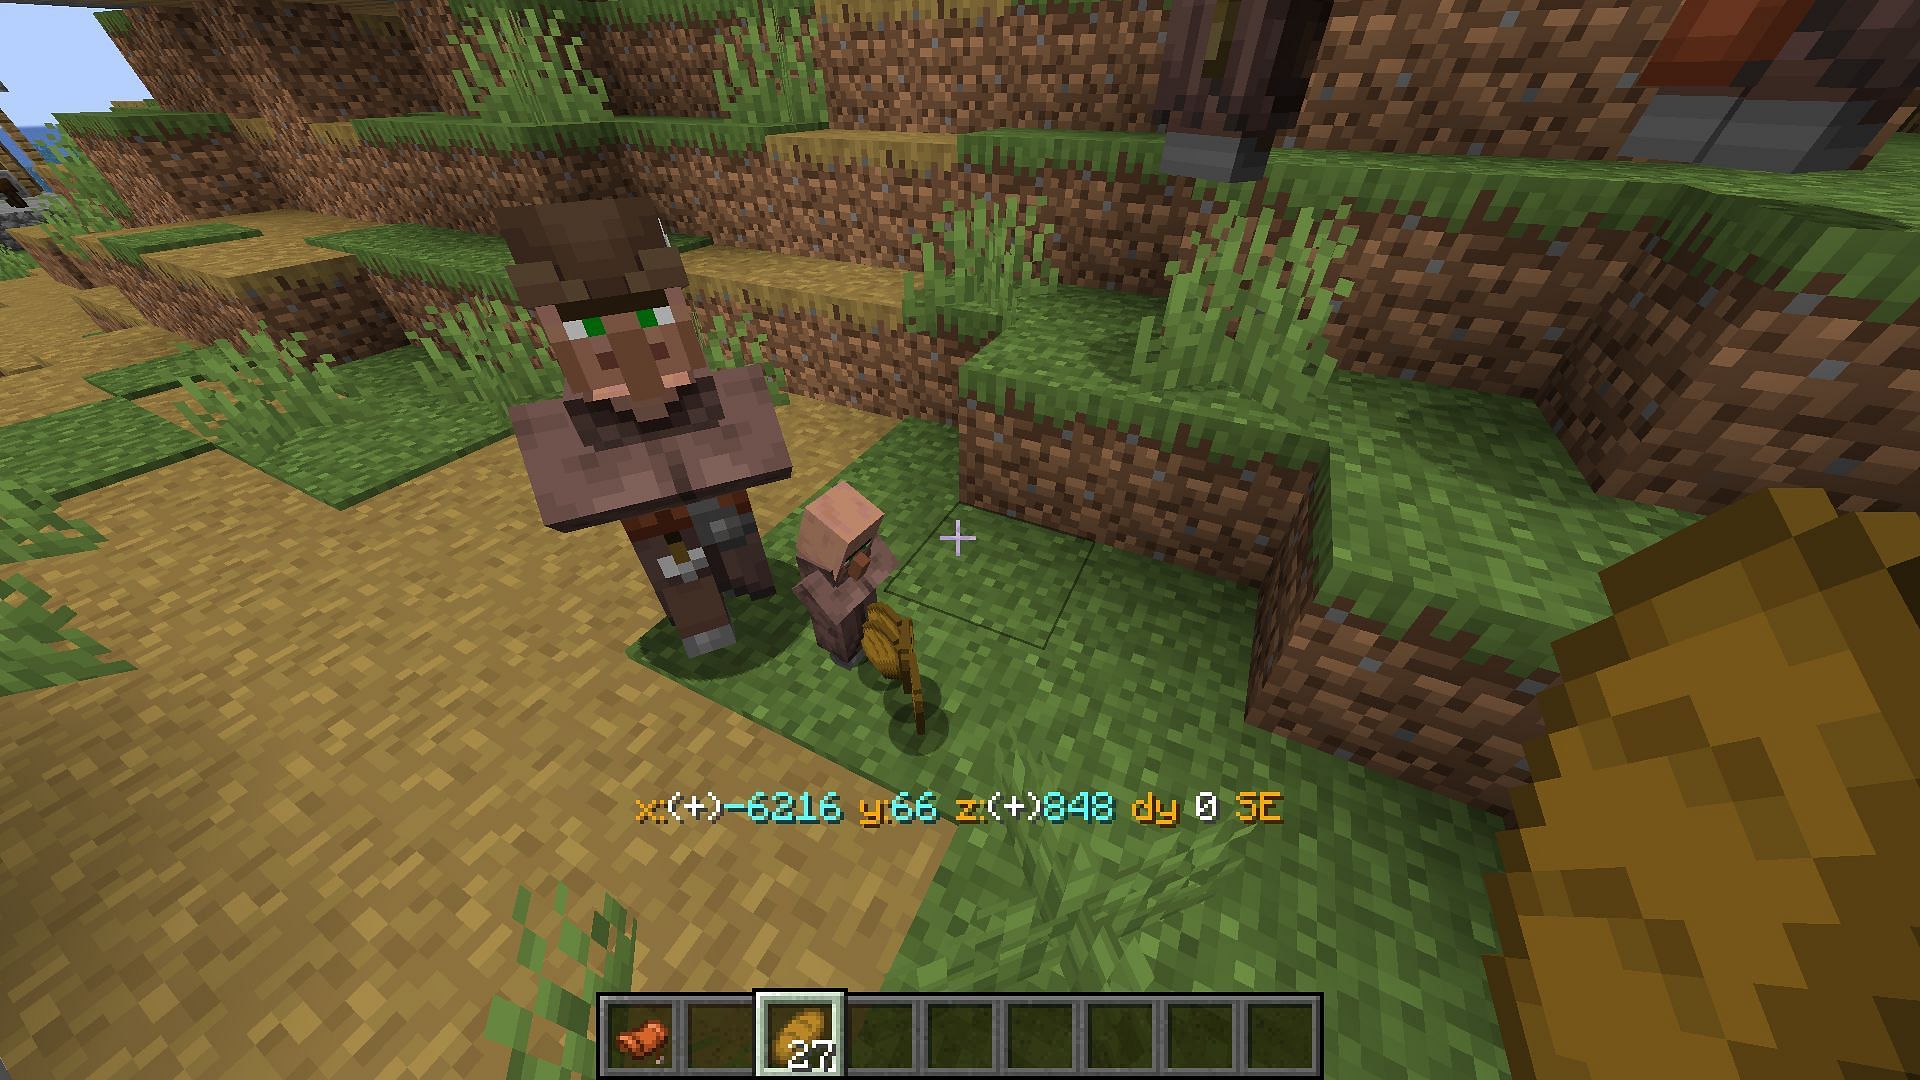 Illagers will not attack baby villagers, but they can hurt them accidentally (Image via Mojang)